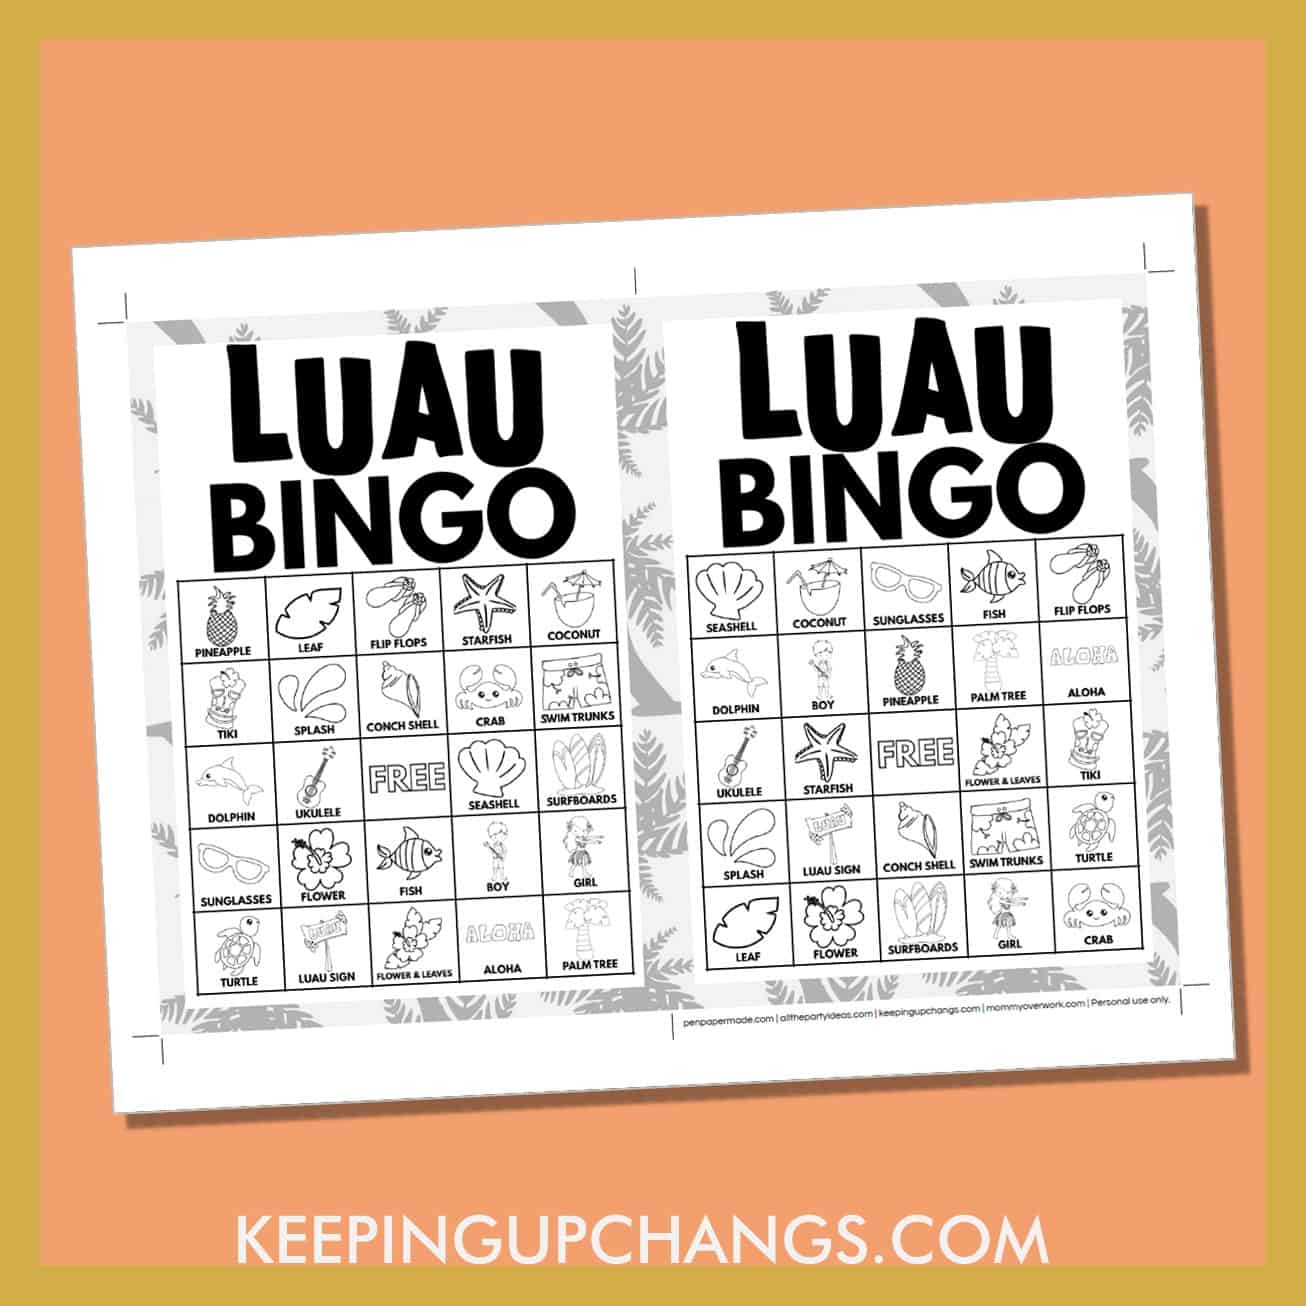 free hawaiian luau bingo card 5x5 5x7 game boards with black, white images and text words.